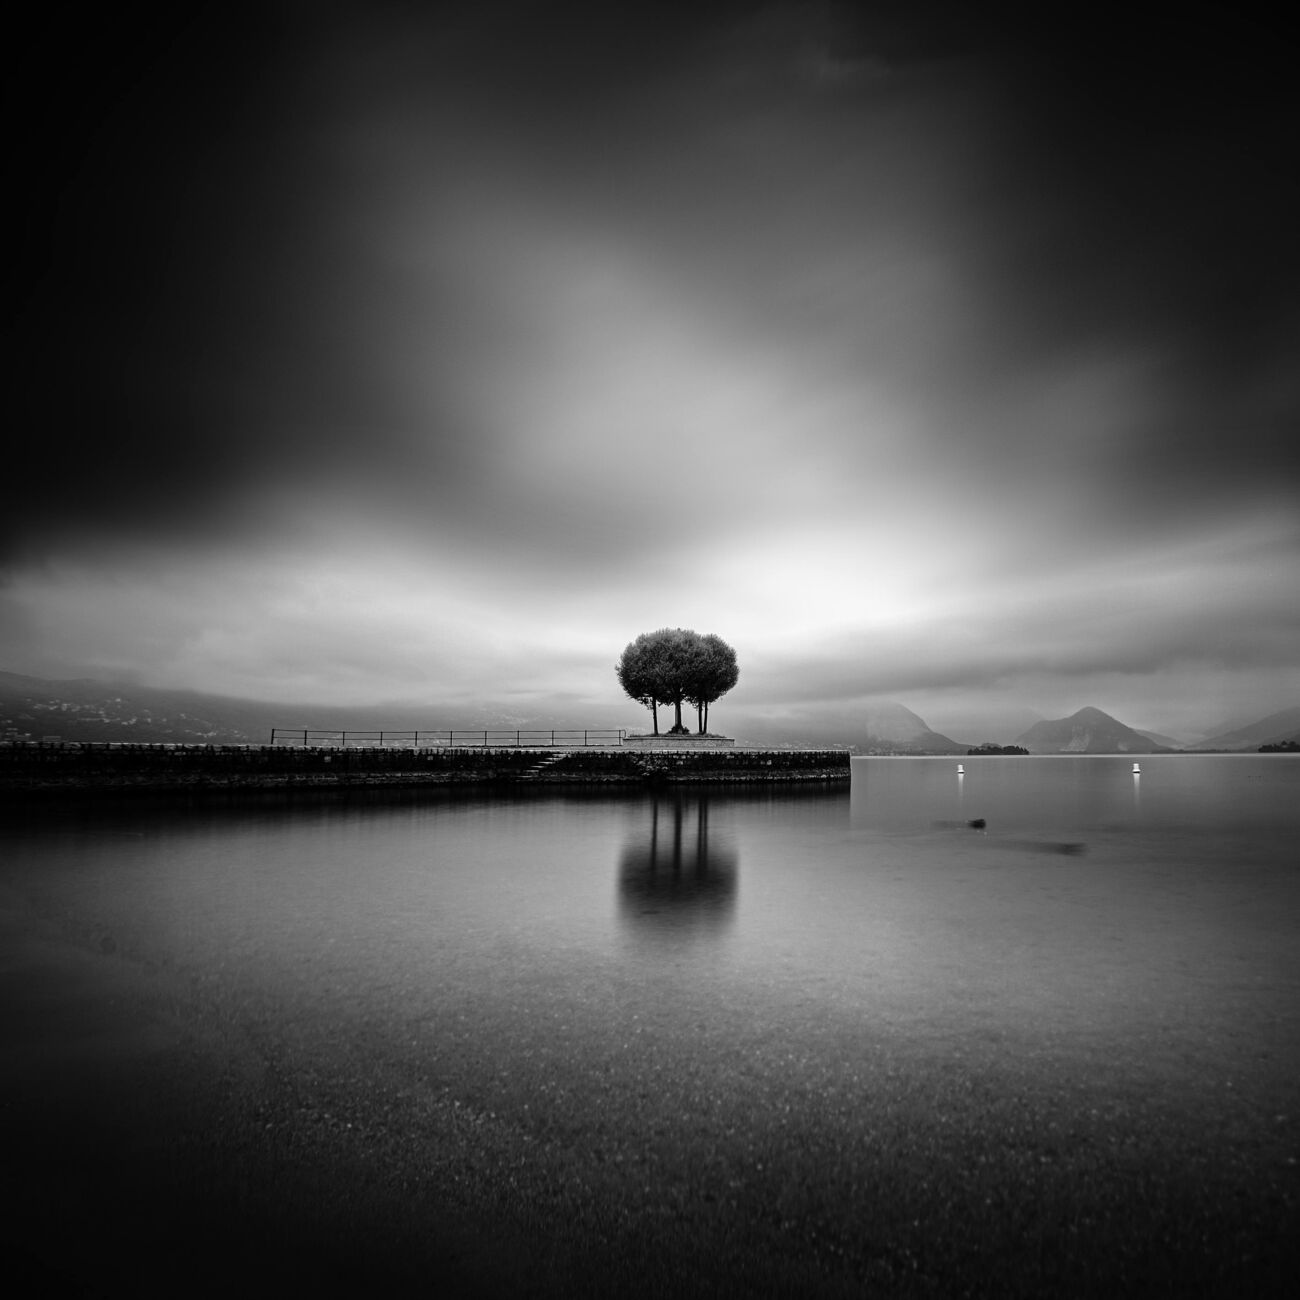 Trees On Pier, Lake Maggiore, Italy. August 2014. Ref-11451 - Denis Olivier Photography